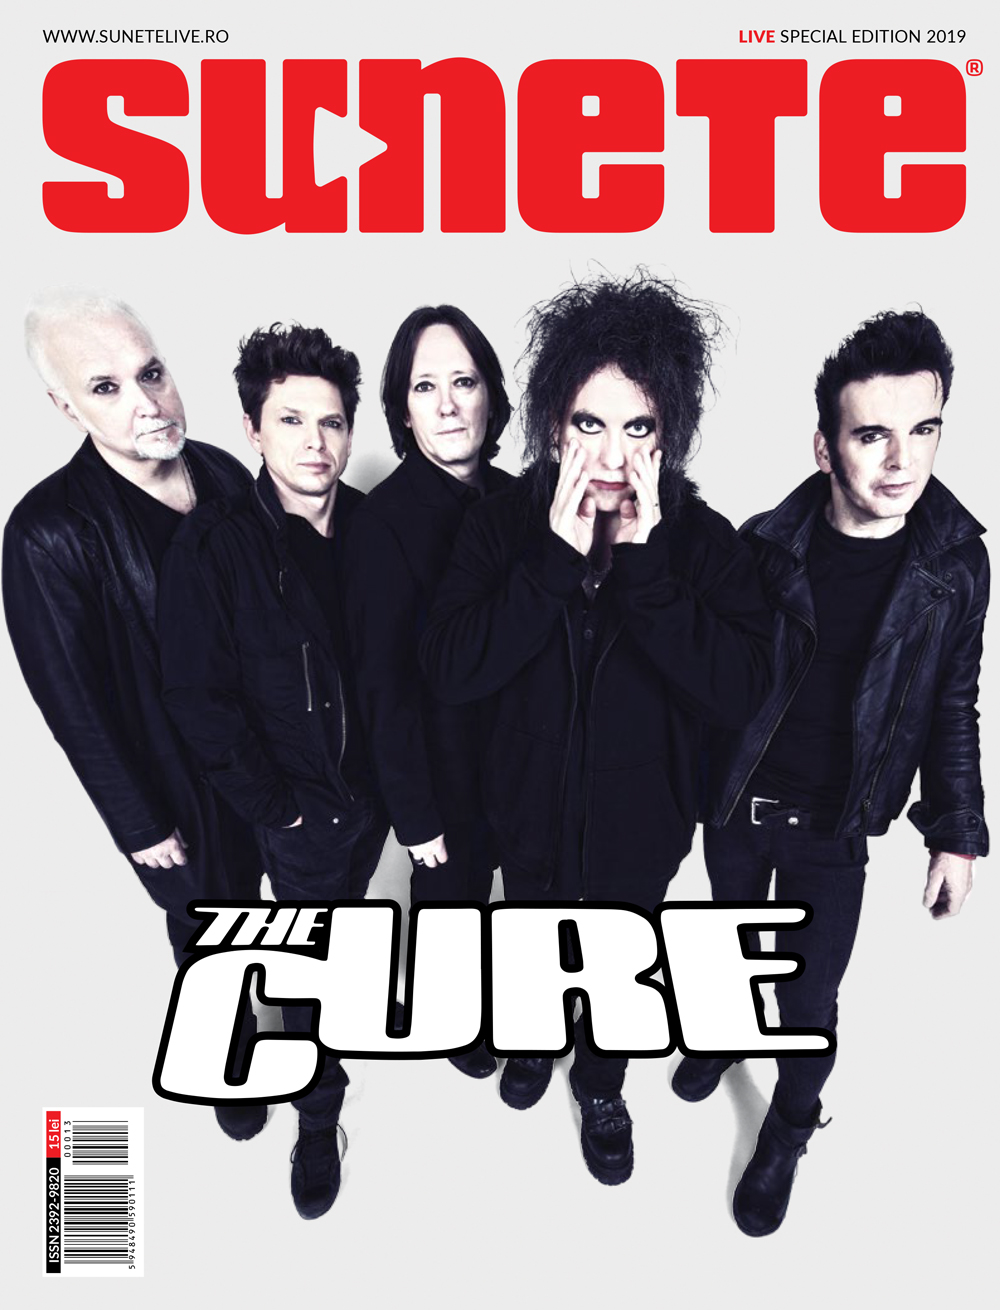 Sunete Live Special Edition 2019 - The Cure #13